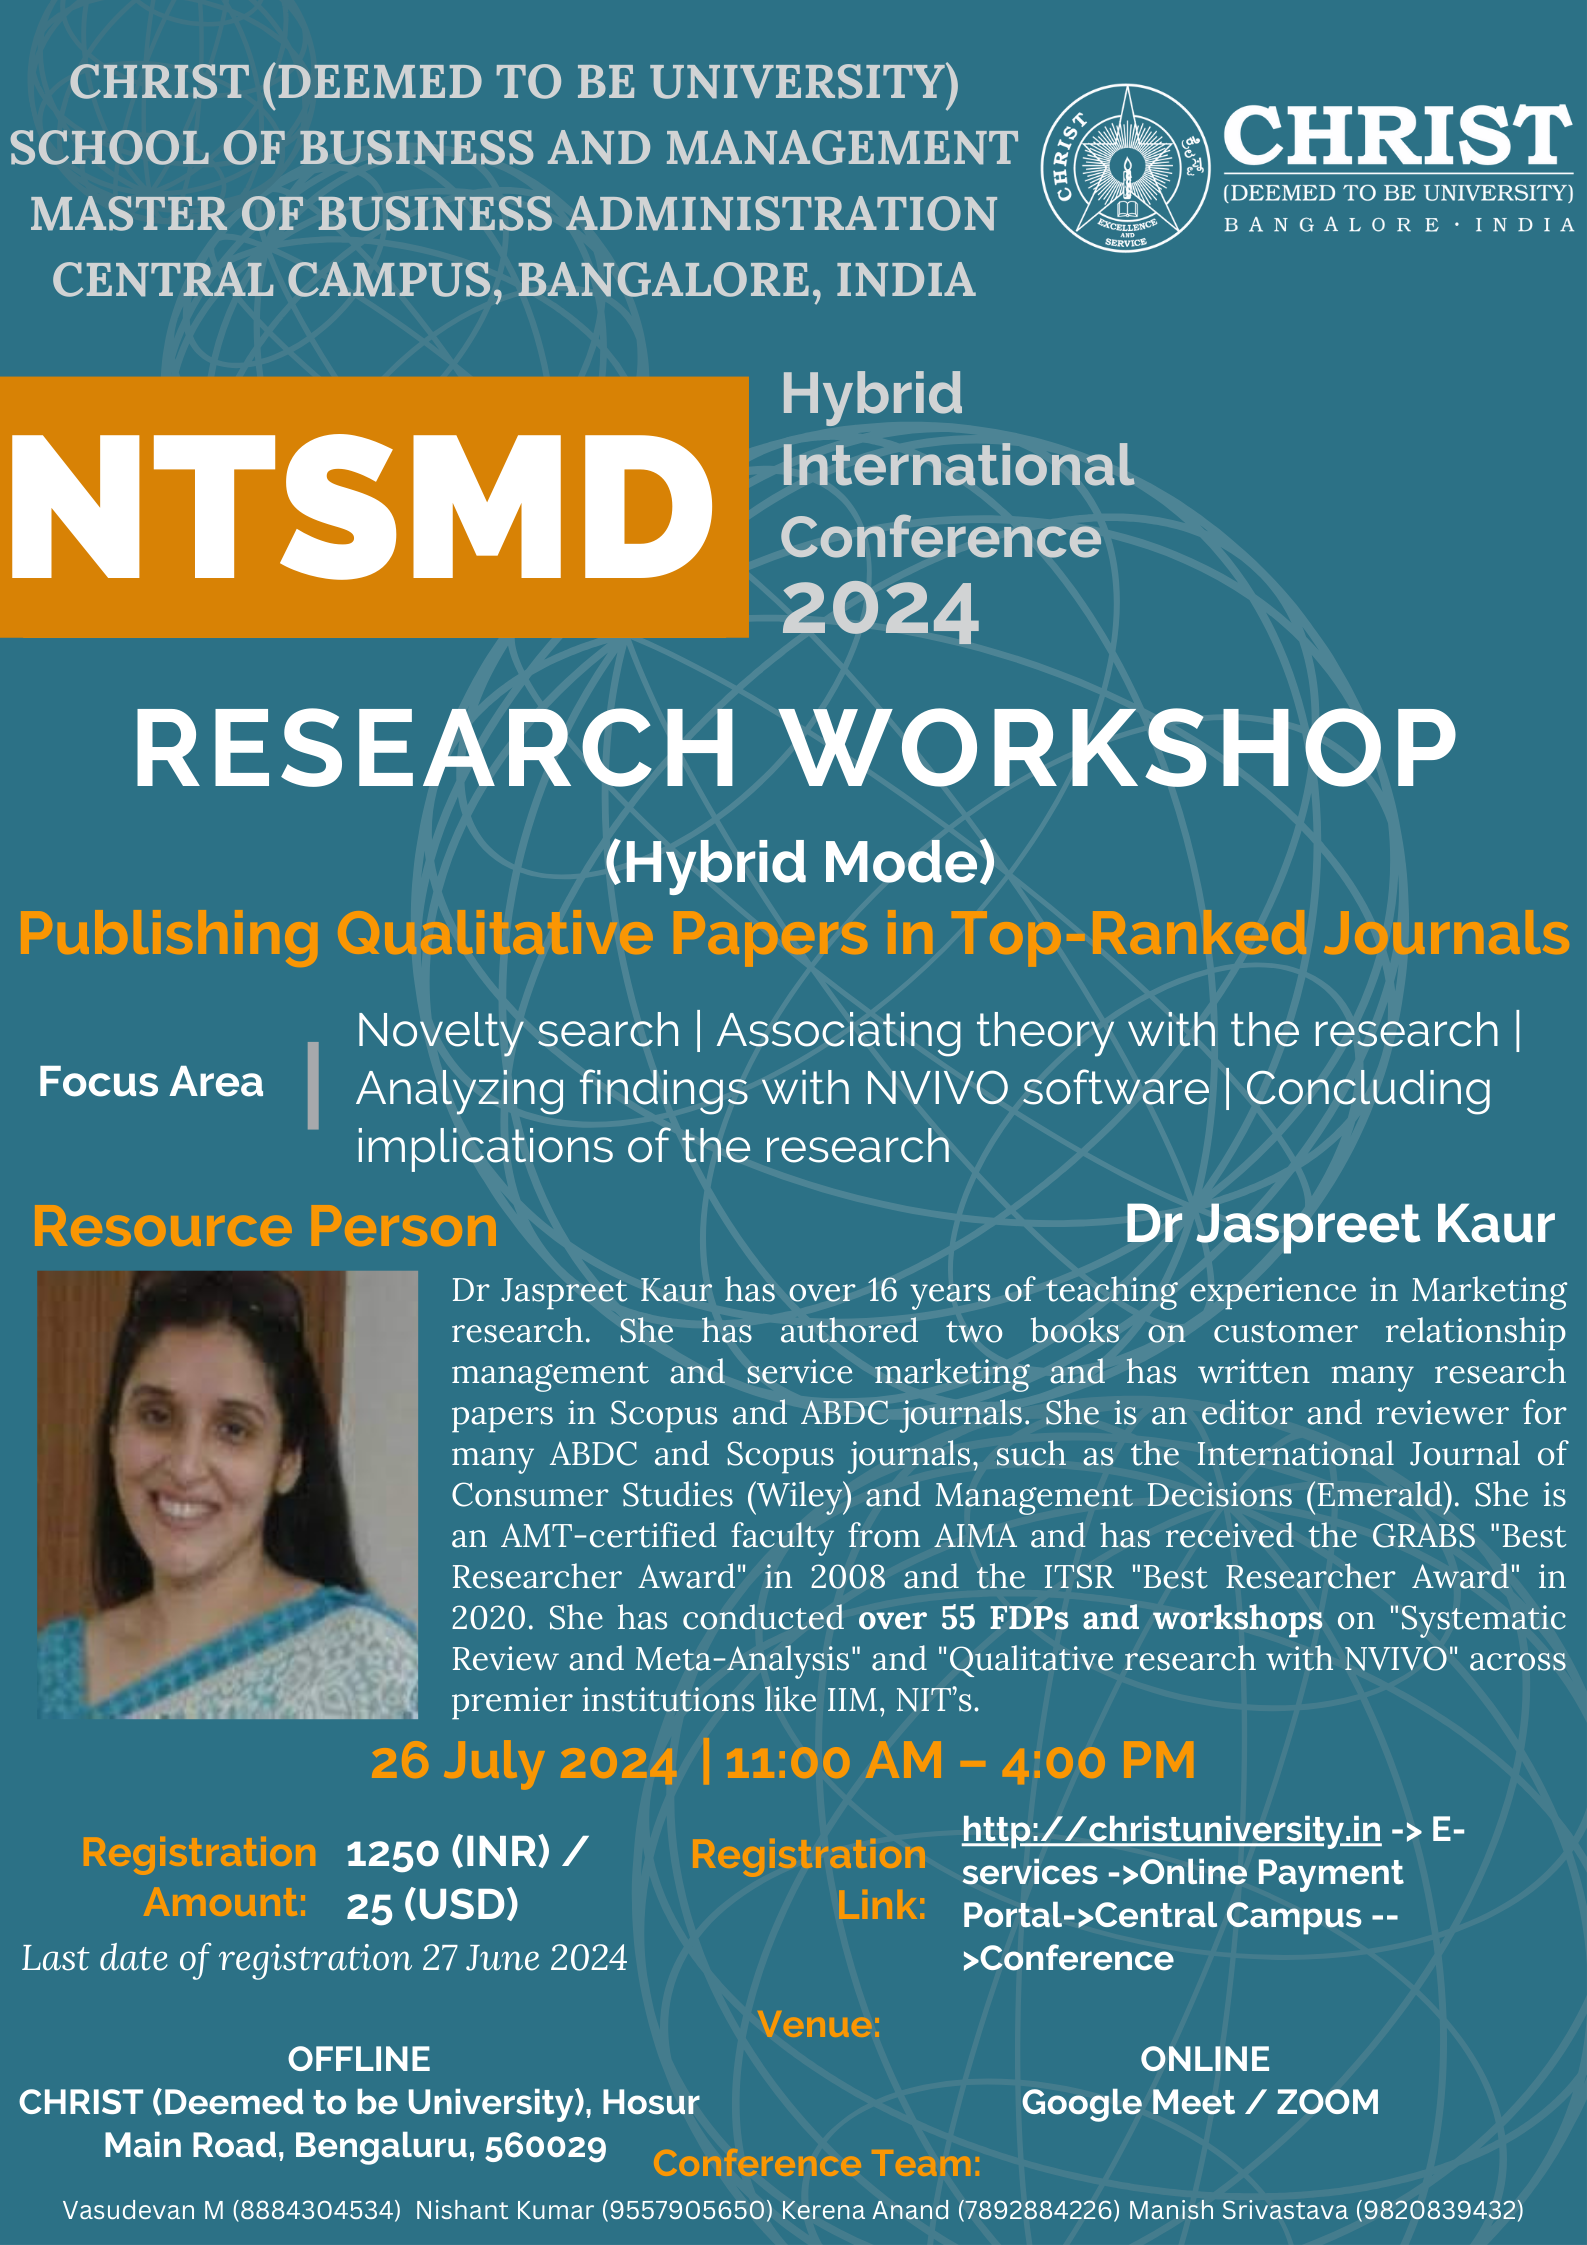 RESEARCH WORKSHOP POSTER